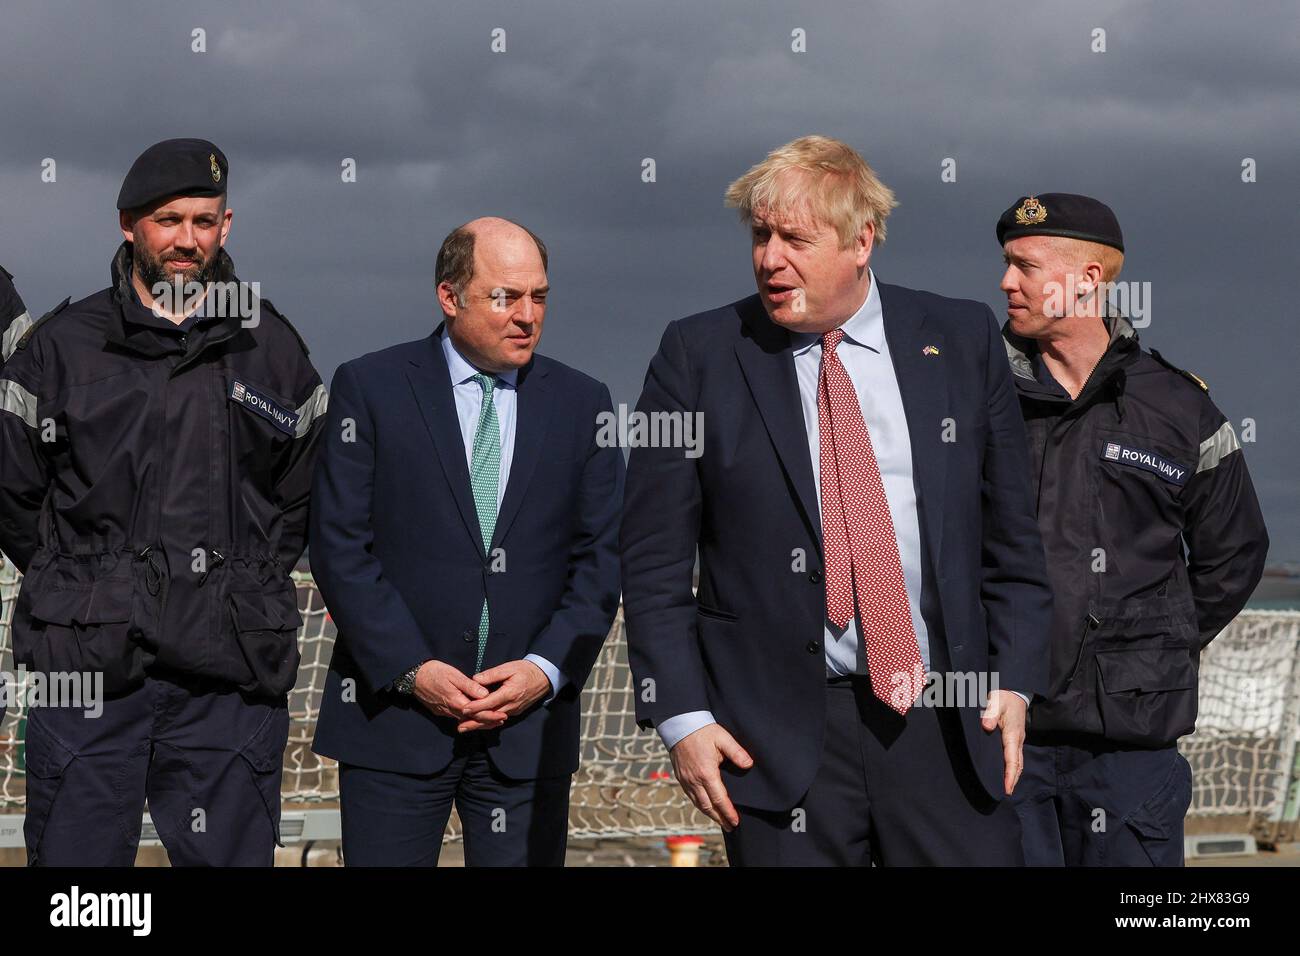 Prime Minister Boris Johnson (second right) and Defence Secretary Ben Wallace (second left) after posing for a picture with members of the ship's company onboard HMS Dauntless, a Type 45 destroyer of the Royal Navy that has undergone a refit, as he visits Cammell Laird shipyard in Merseyside. Picture date: Thursday March 10, 2022. Stock Photo